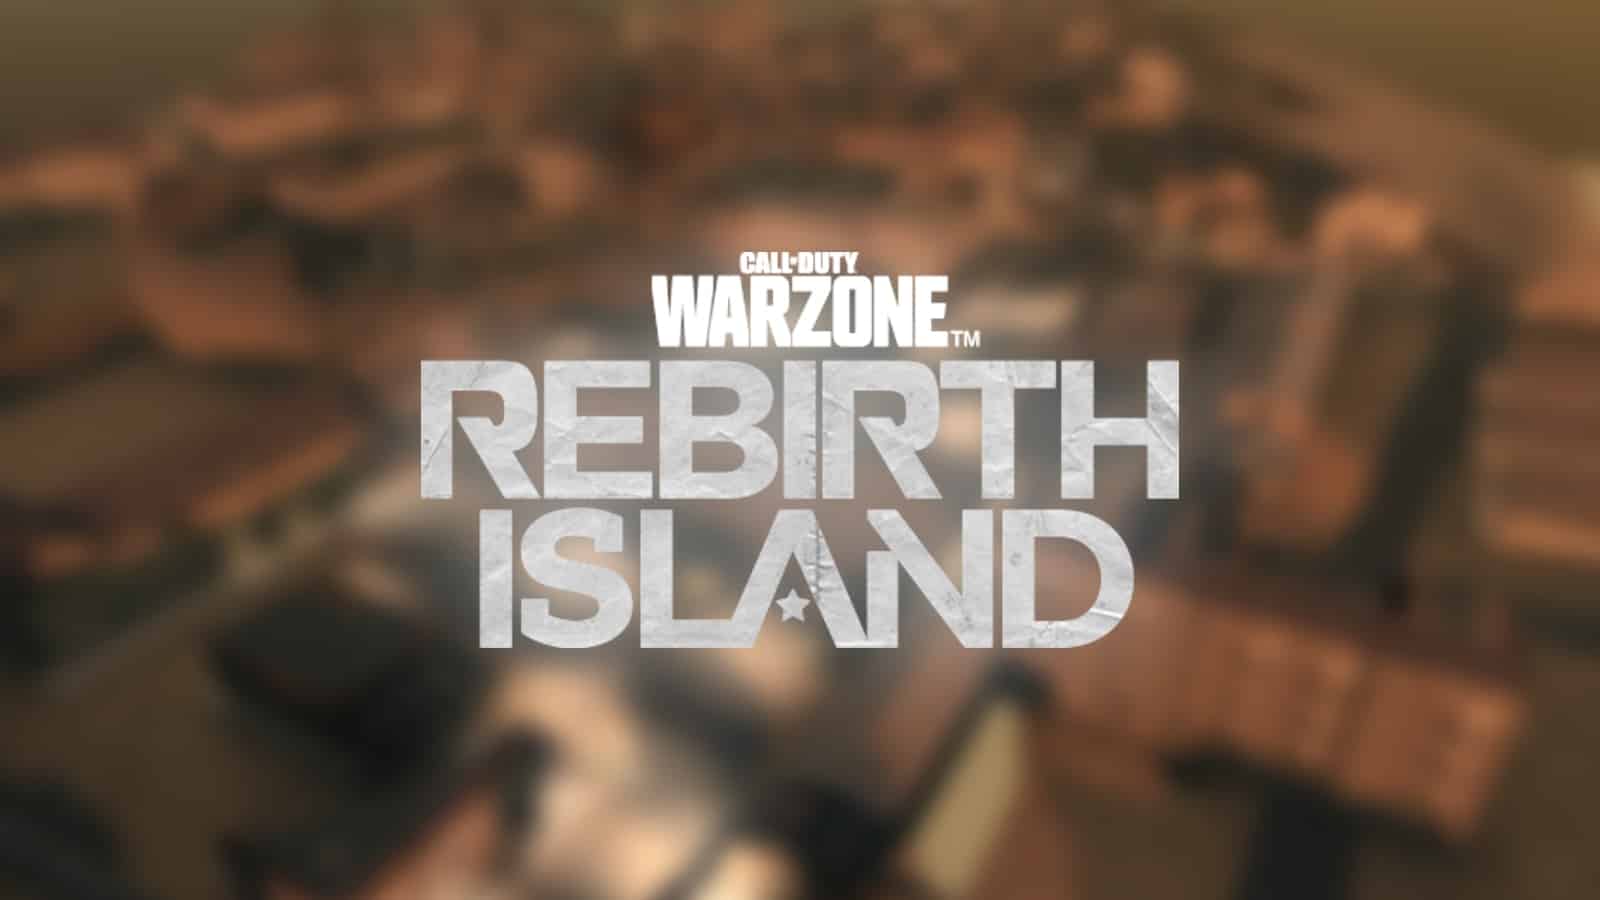 Warzone, Rebirth Island Event Guide - How To Play & Rewards